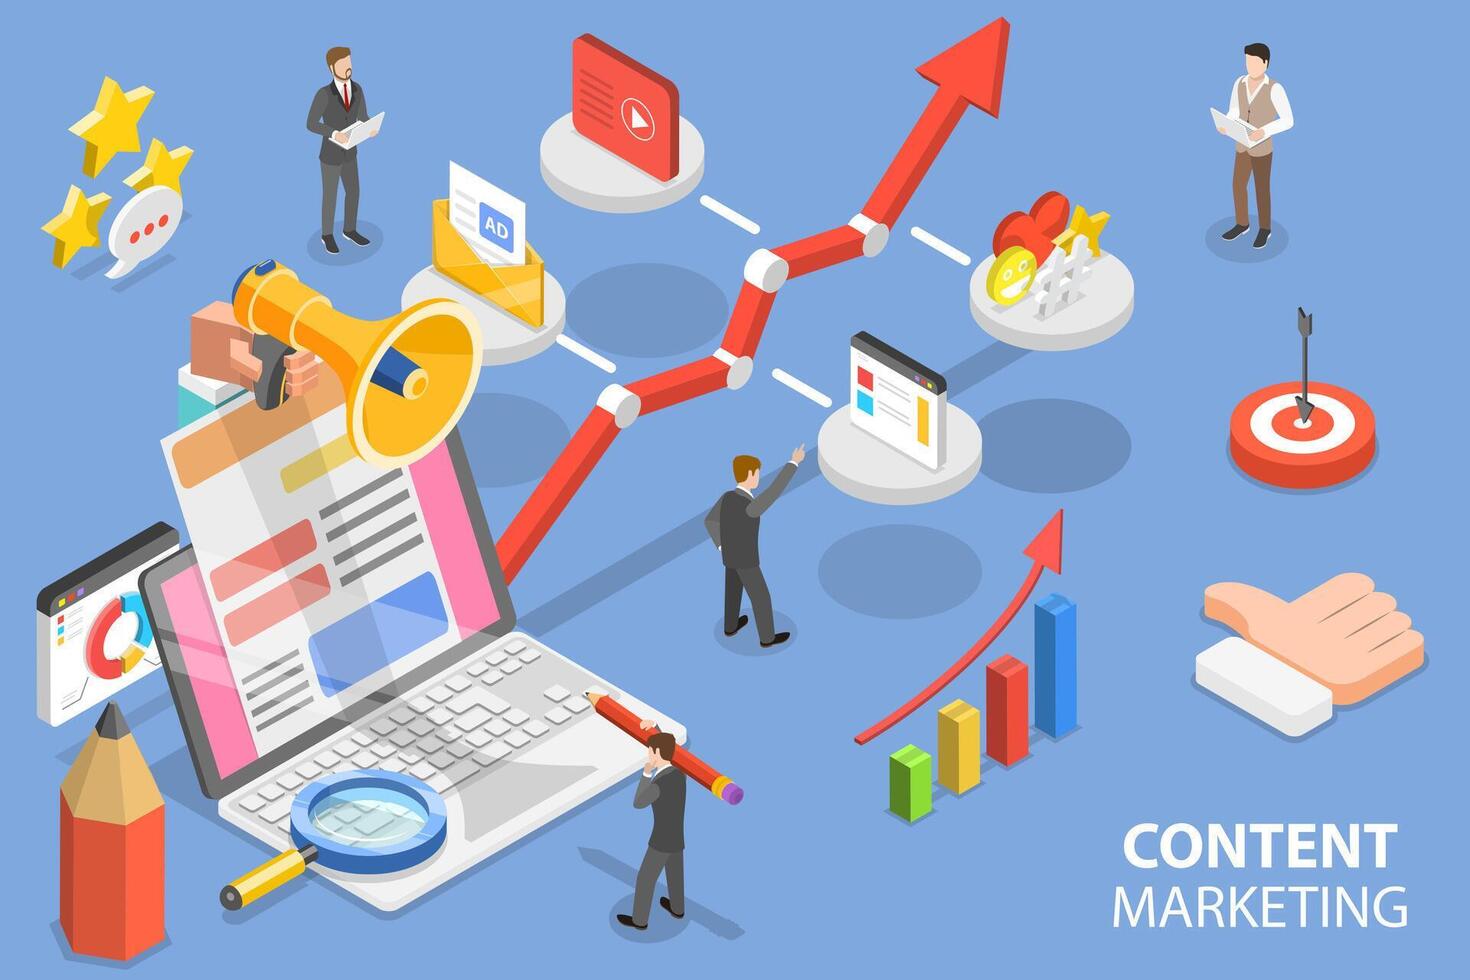 3D Isometric Flat Vector Conceptual Illustration of Content Based Marketing.